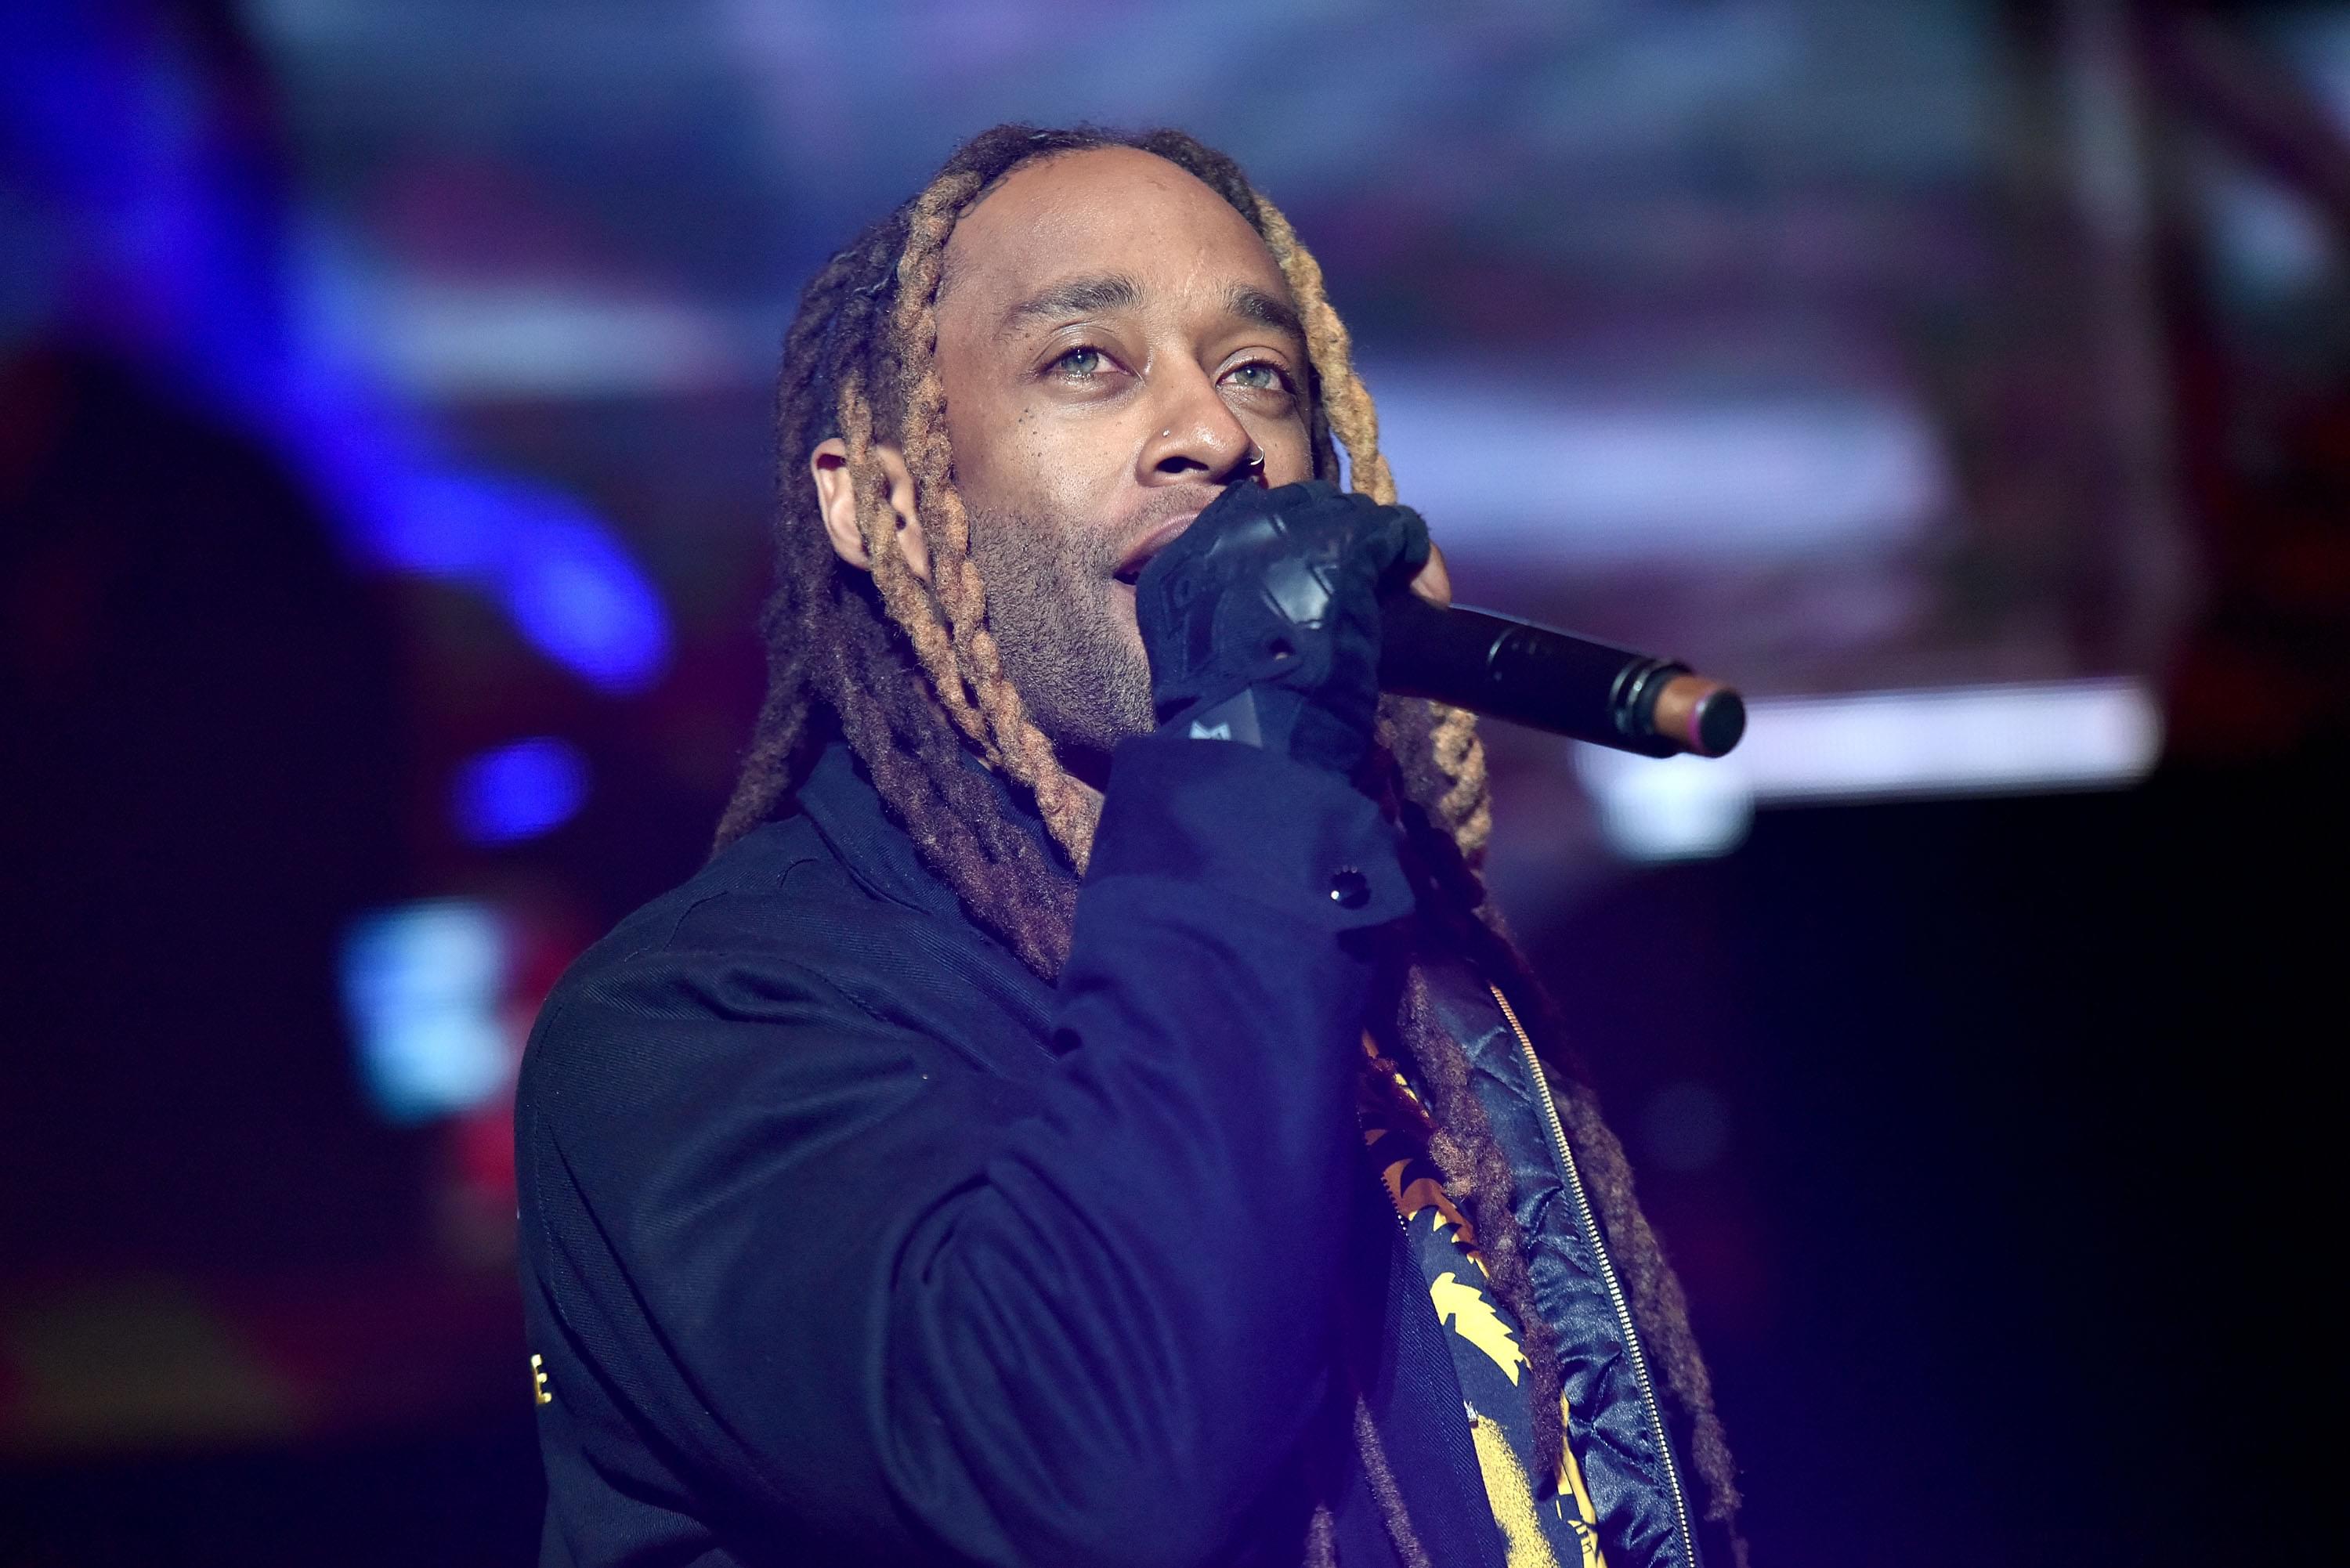 Ty Dolla $ign Tells A Love Story In “Side Effects” Visuals